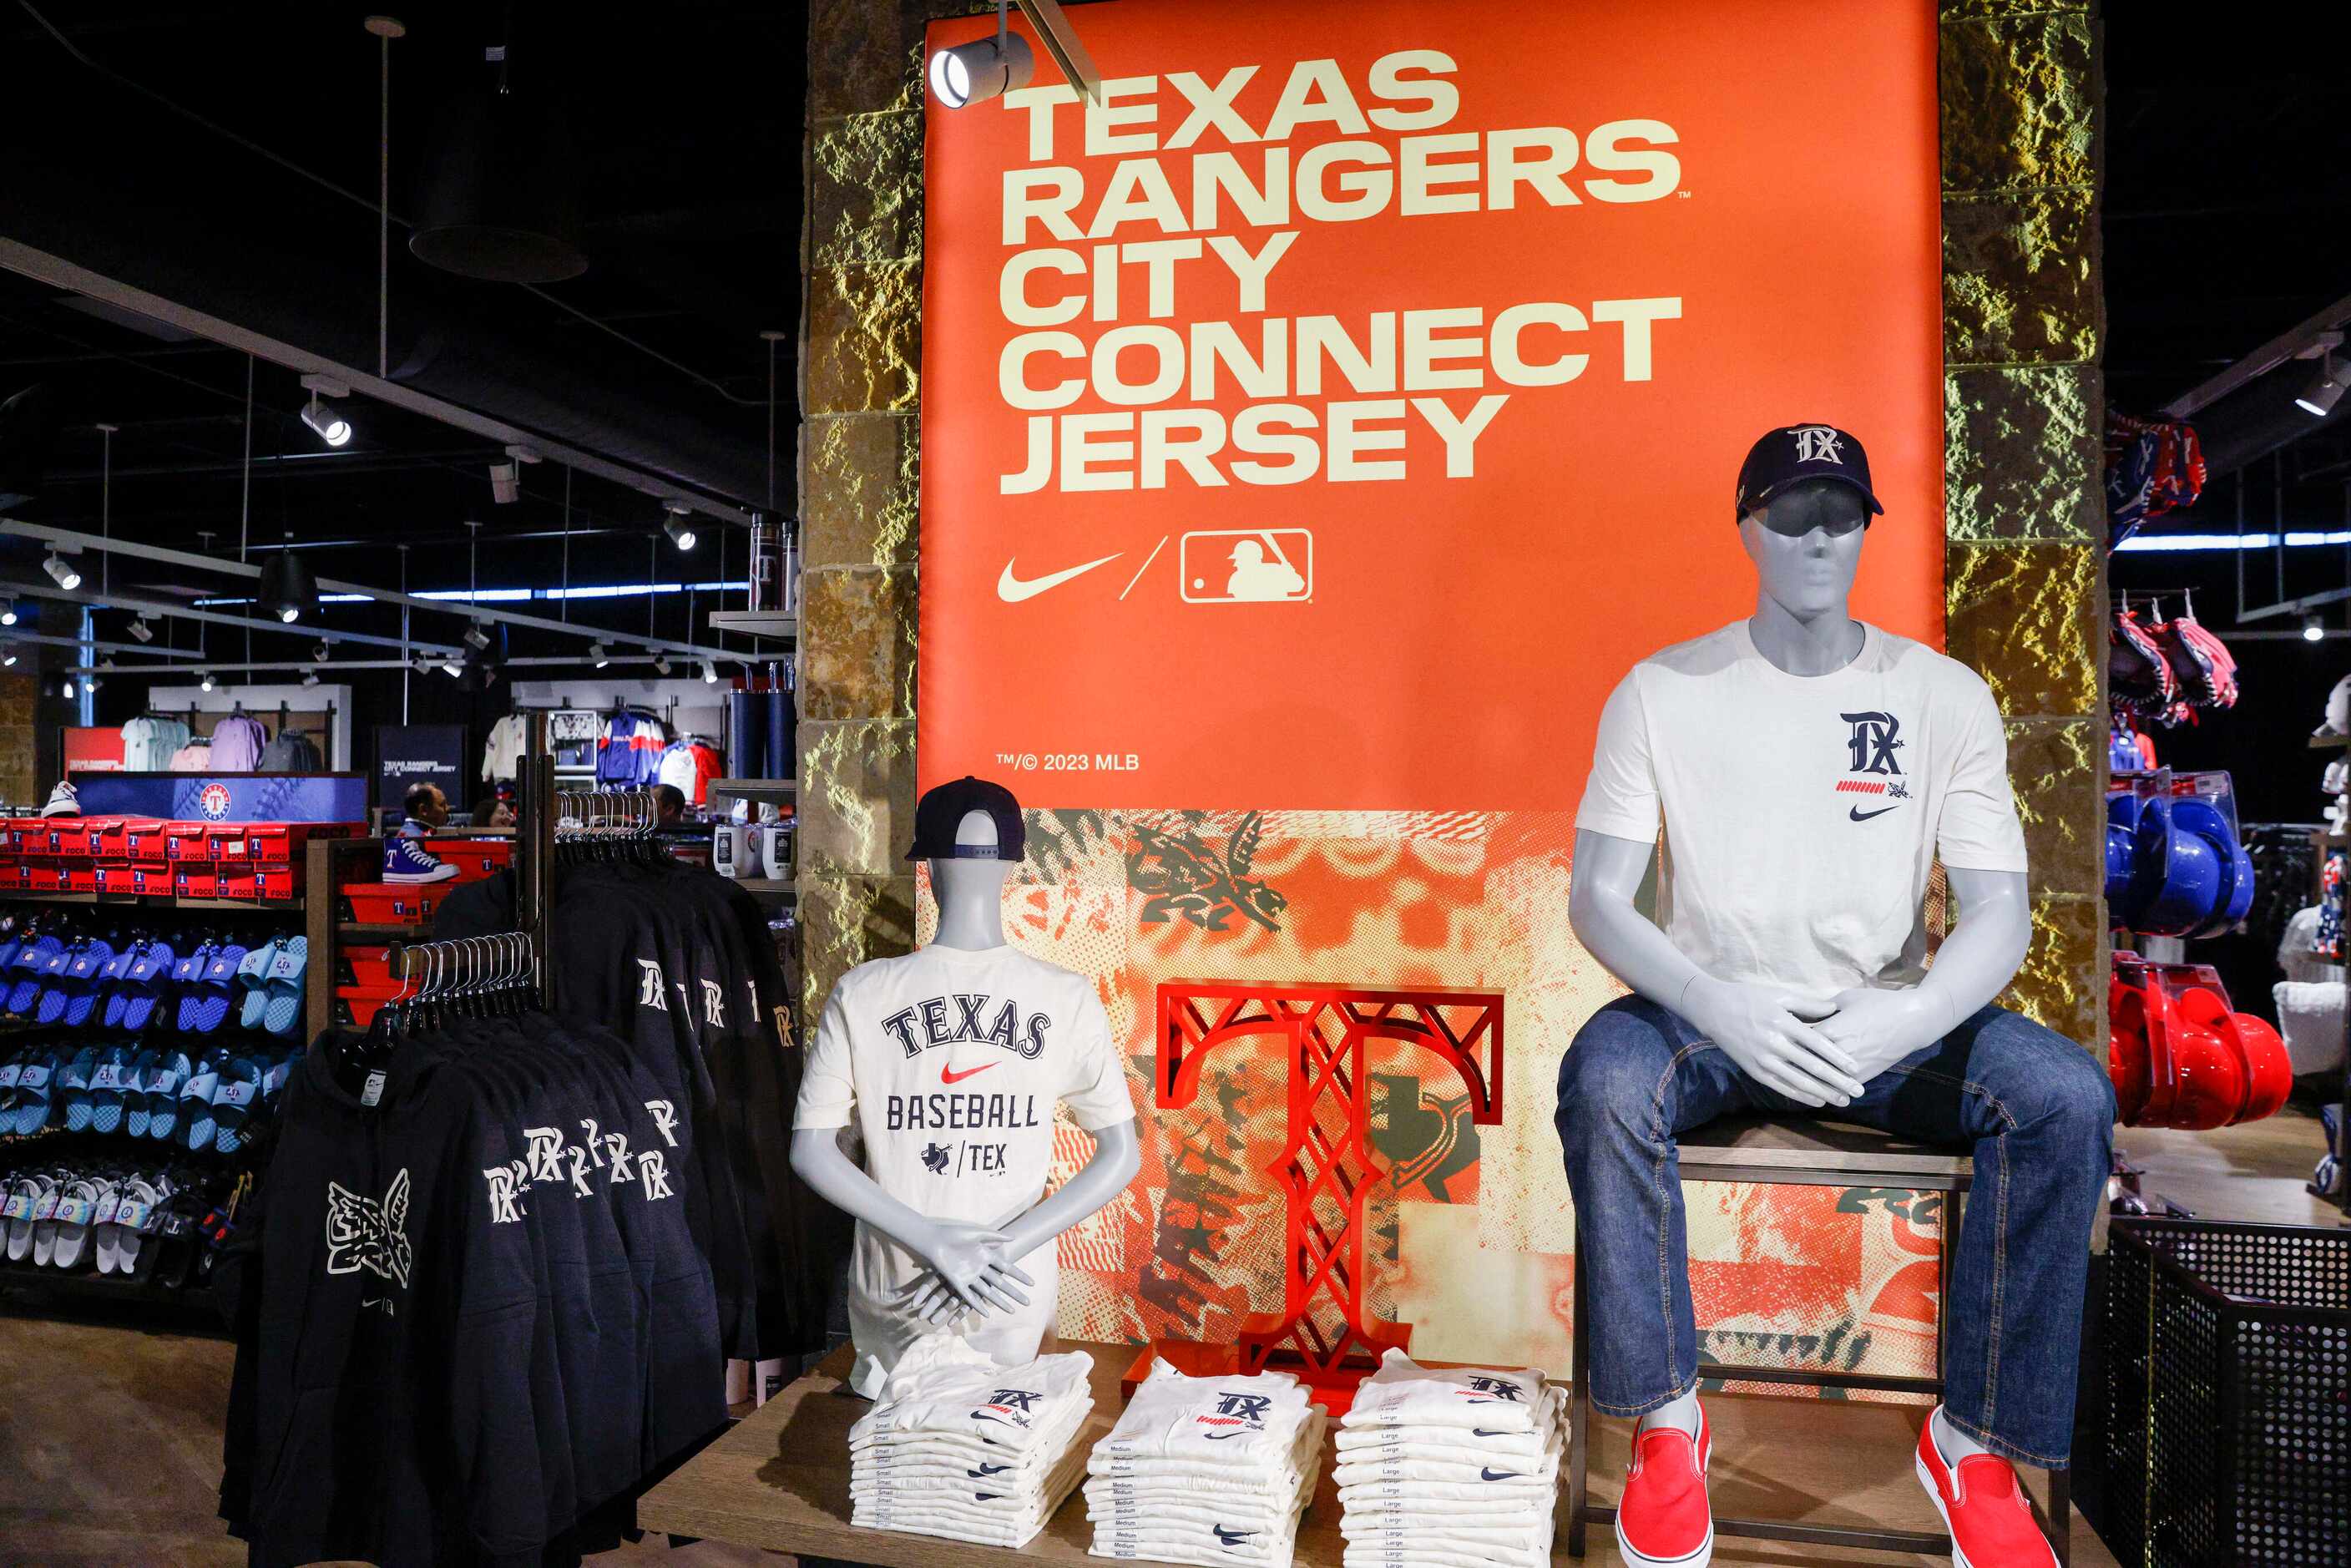 A display shows the new Texas Rangers City Connect Jersey merchandise at Globe Life Field on...